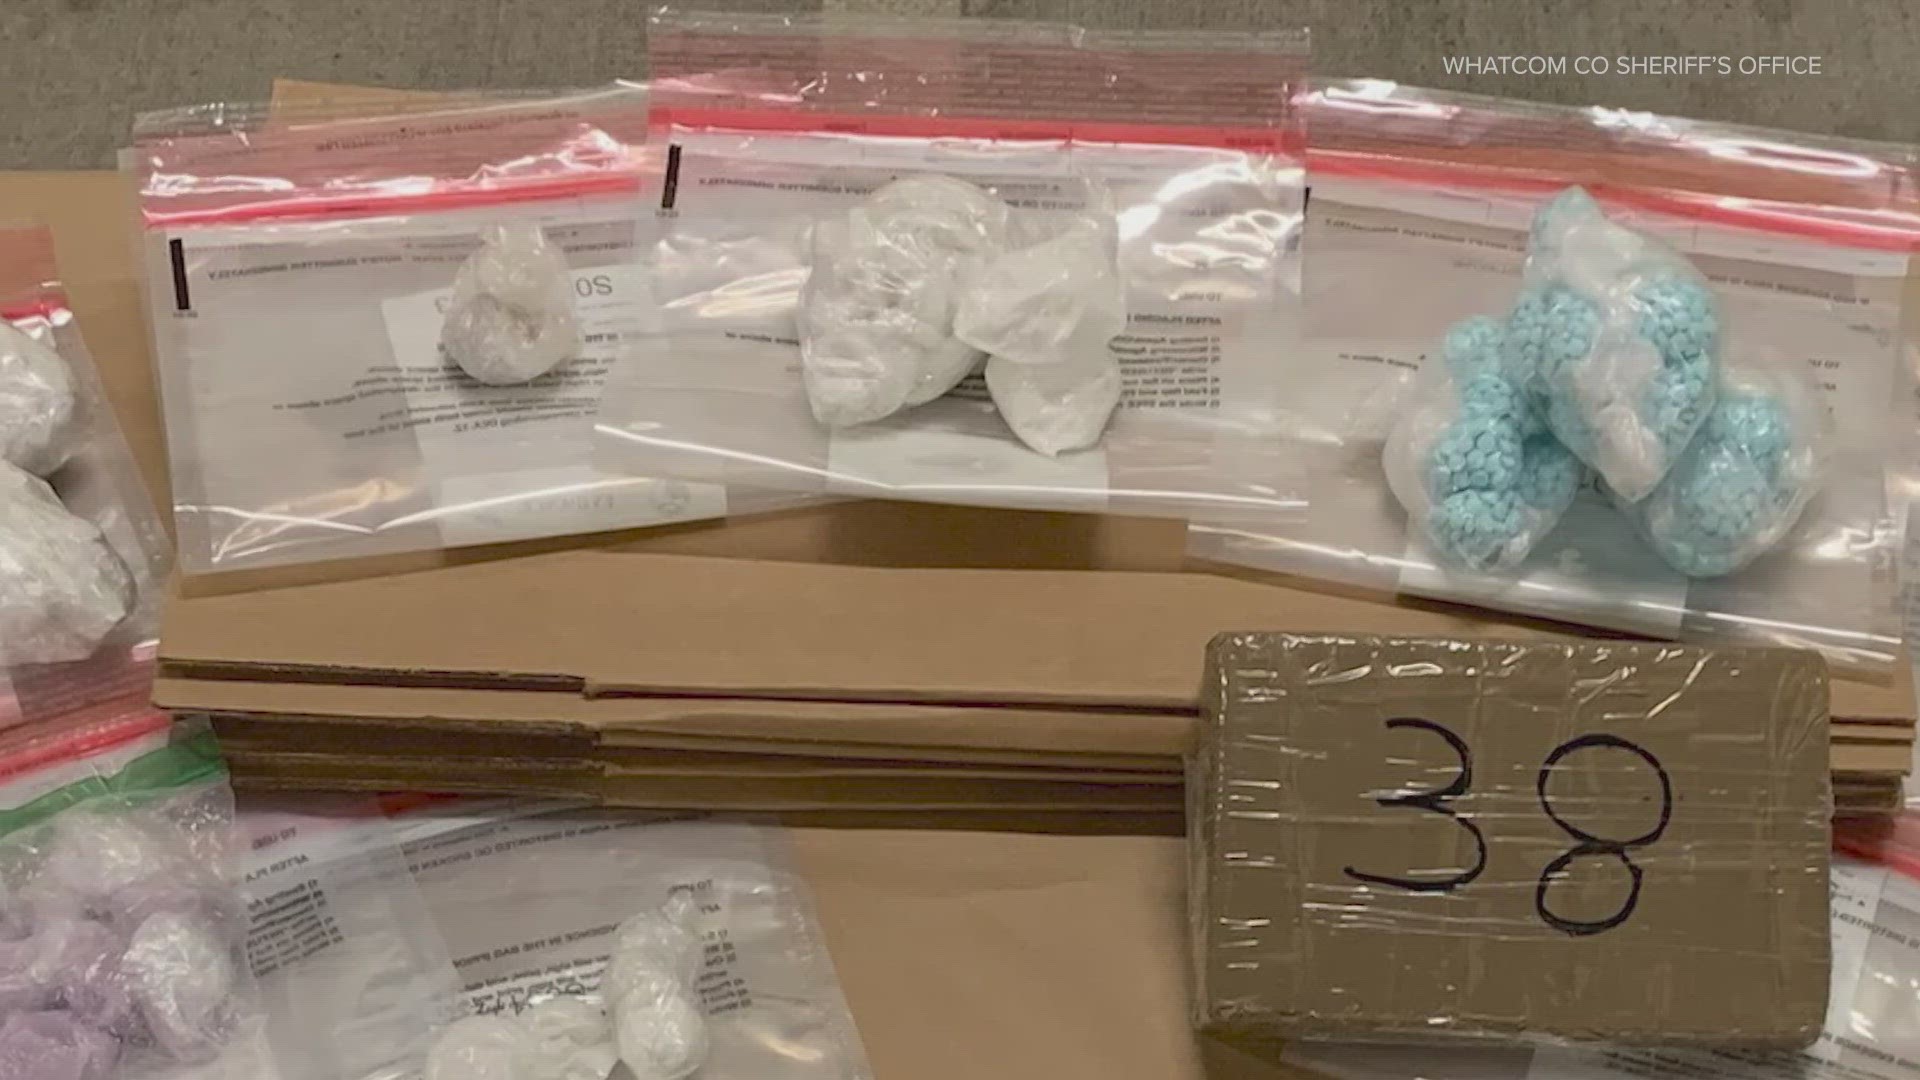 Whatcom County deputies found enough fentanyl in the bust to potentially kill the entire population of Bellingham.